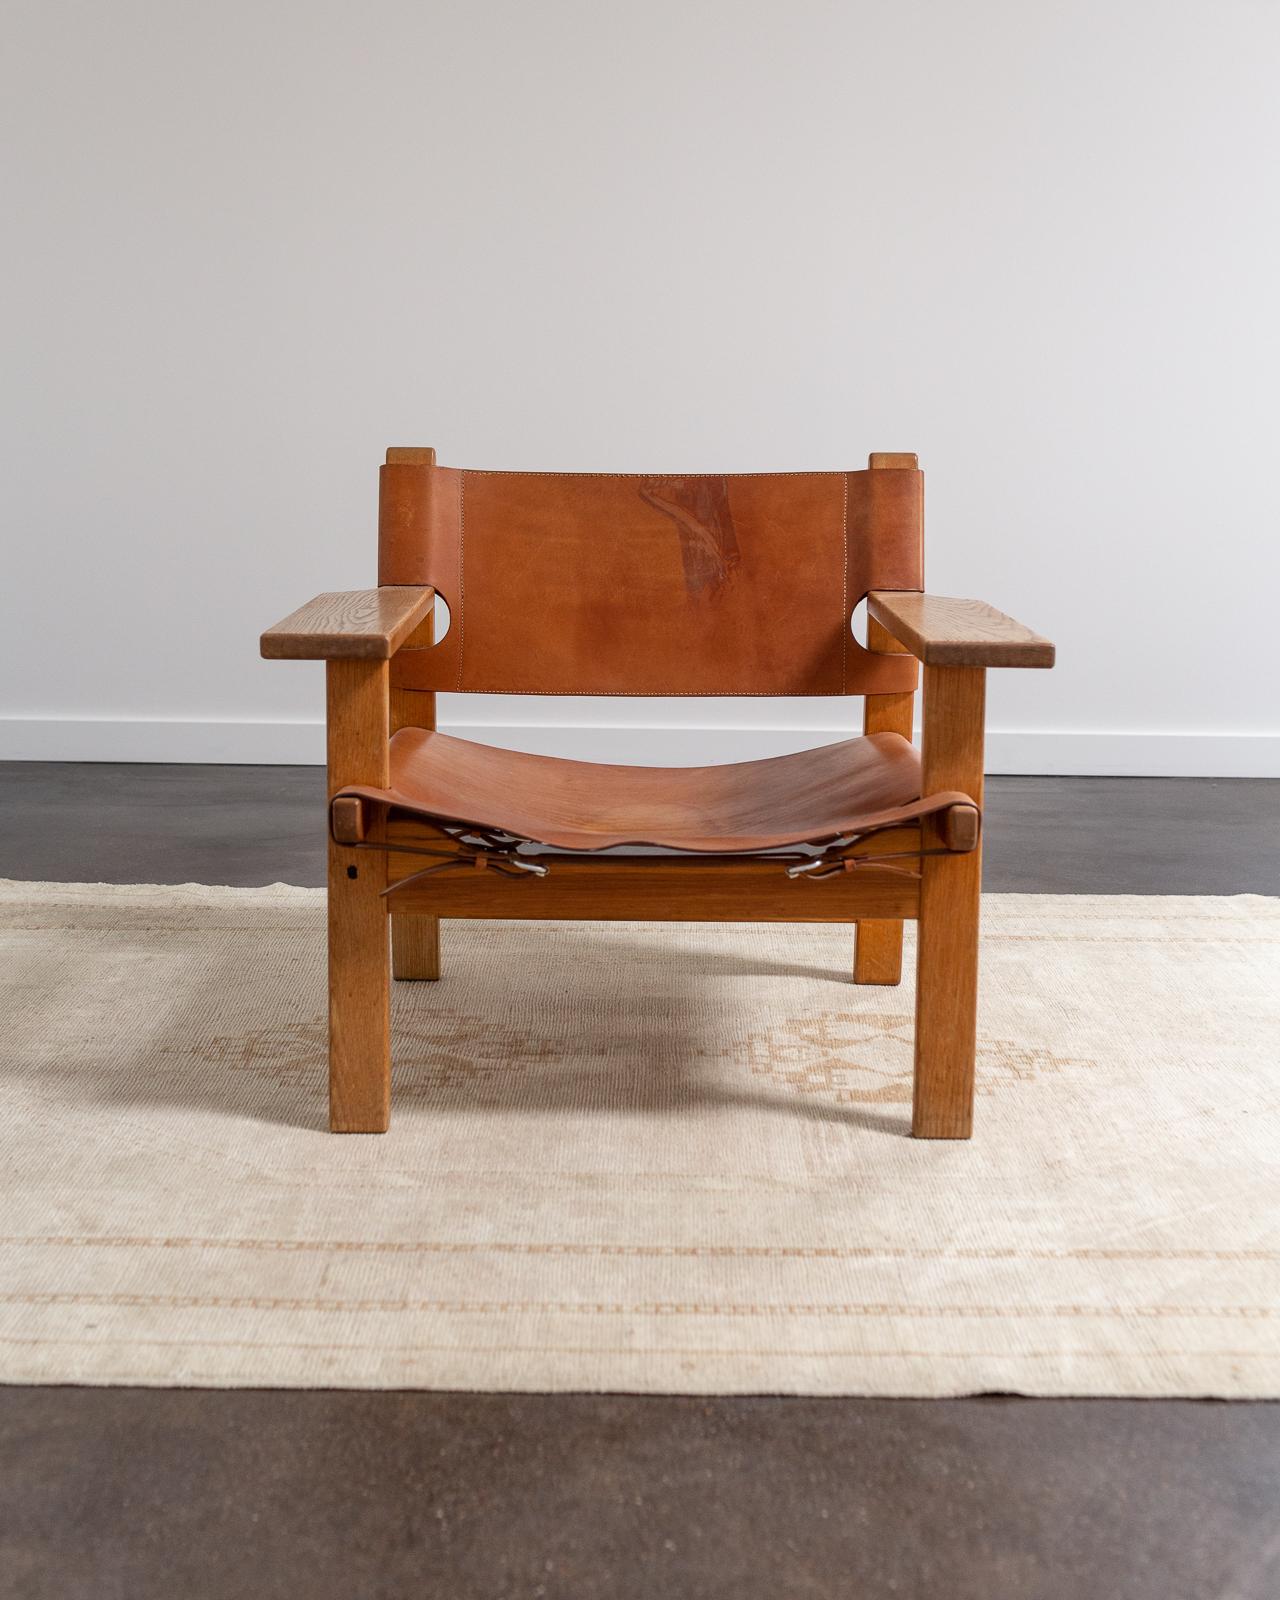 The Spanish Chair designed and heavily influenced after Børge Mogensen's travels to Spain in the 1950's, takes inspiration from the traditional Spanish technique of robust leather as part of furniture construction. The leather has been conditioned